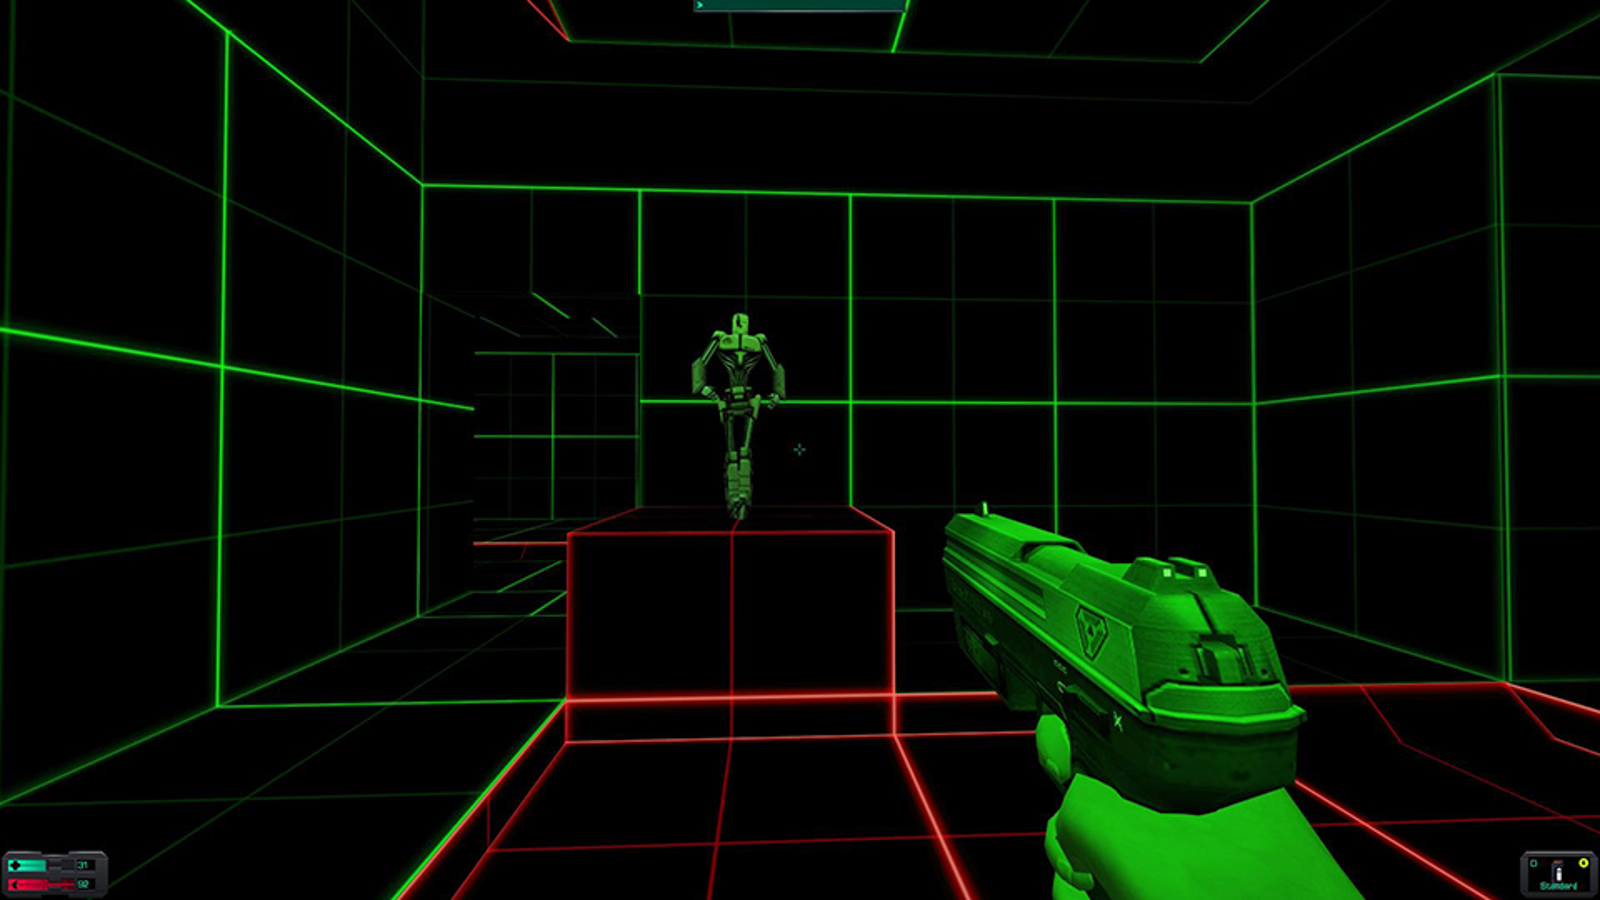 system shock 2 The Hacker